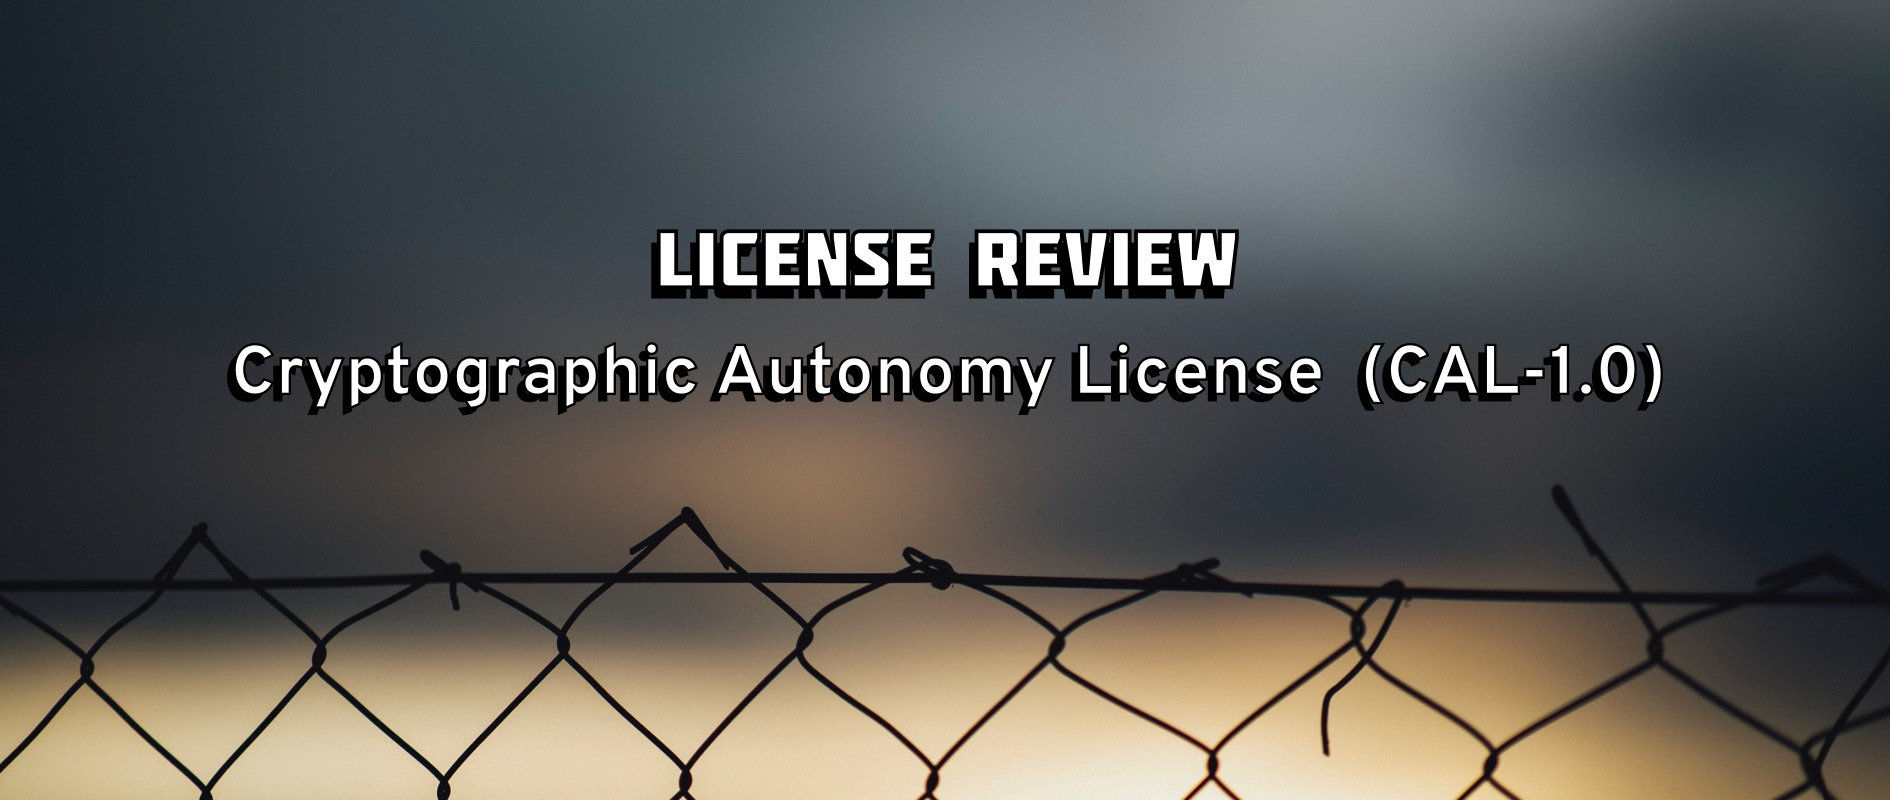 Cryptographic Autonomy License (CAL-1.0): My first license review